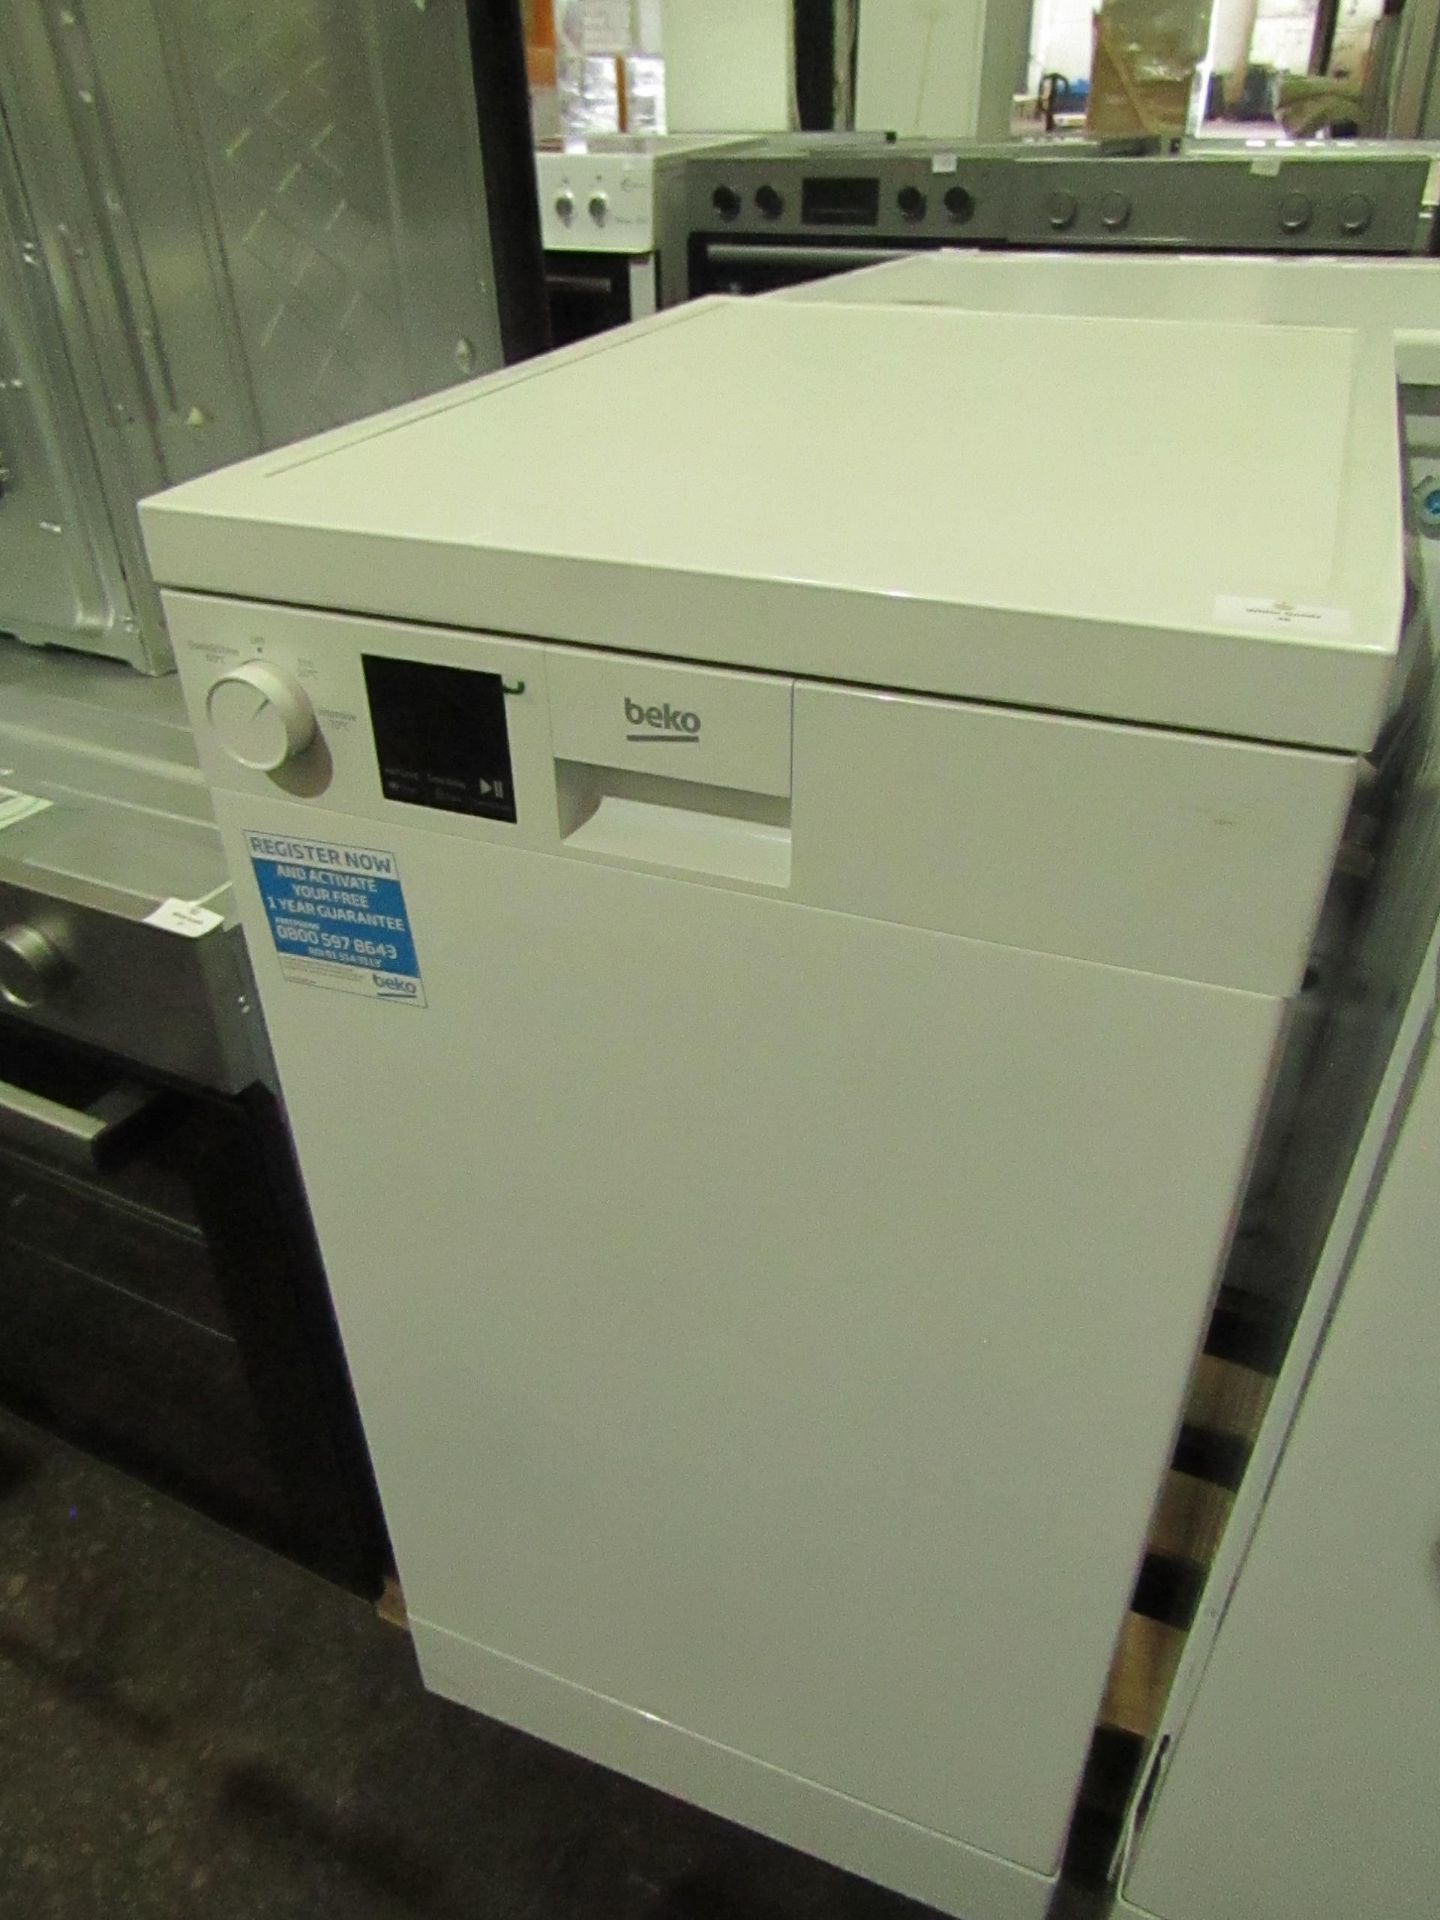 BEKO Dishwasher DVS04X20W RRP ??249.00 - This item looks to be in good condition and appears ready